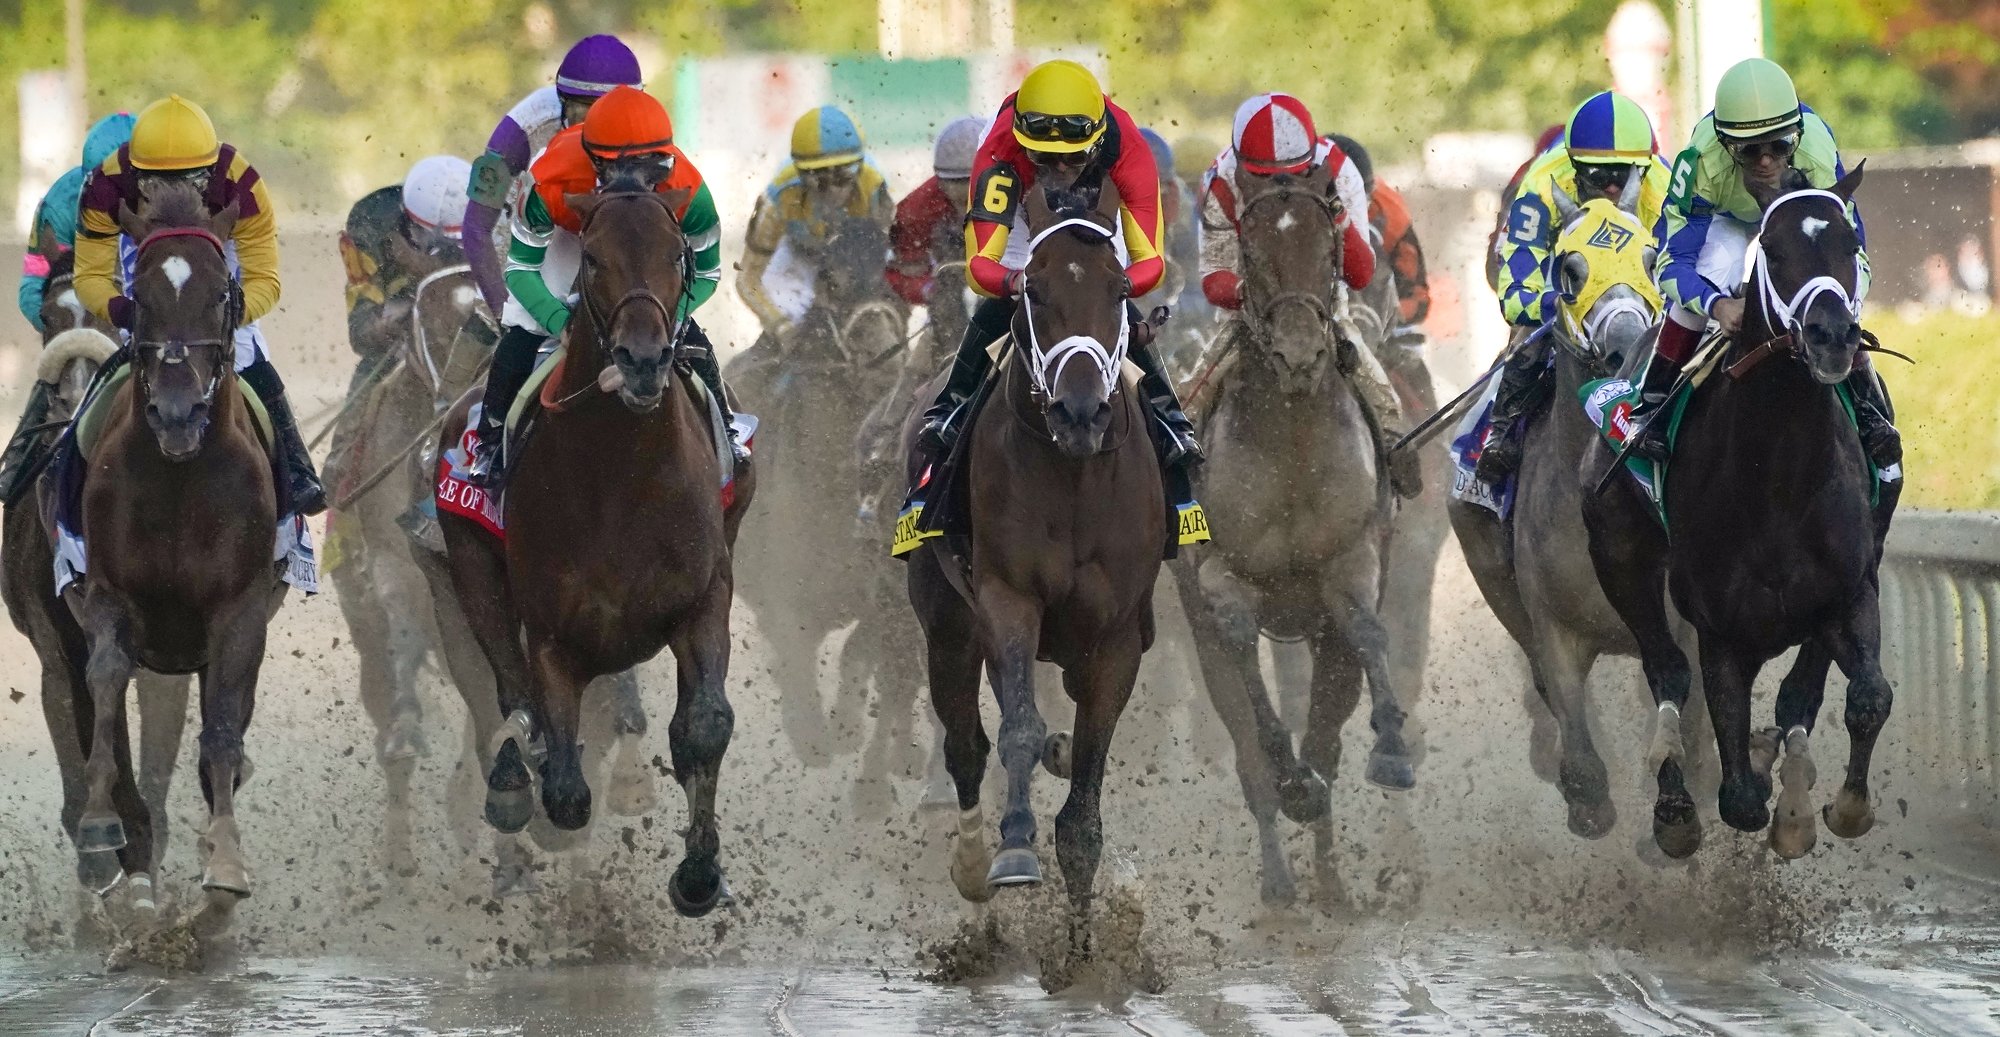 Shooting the Kentucky Derby with the 20fps Sony a9